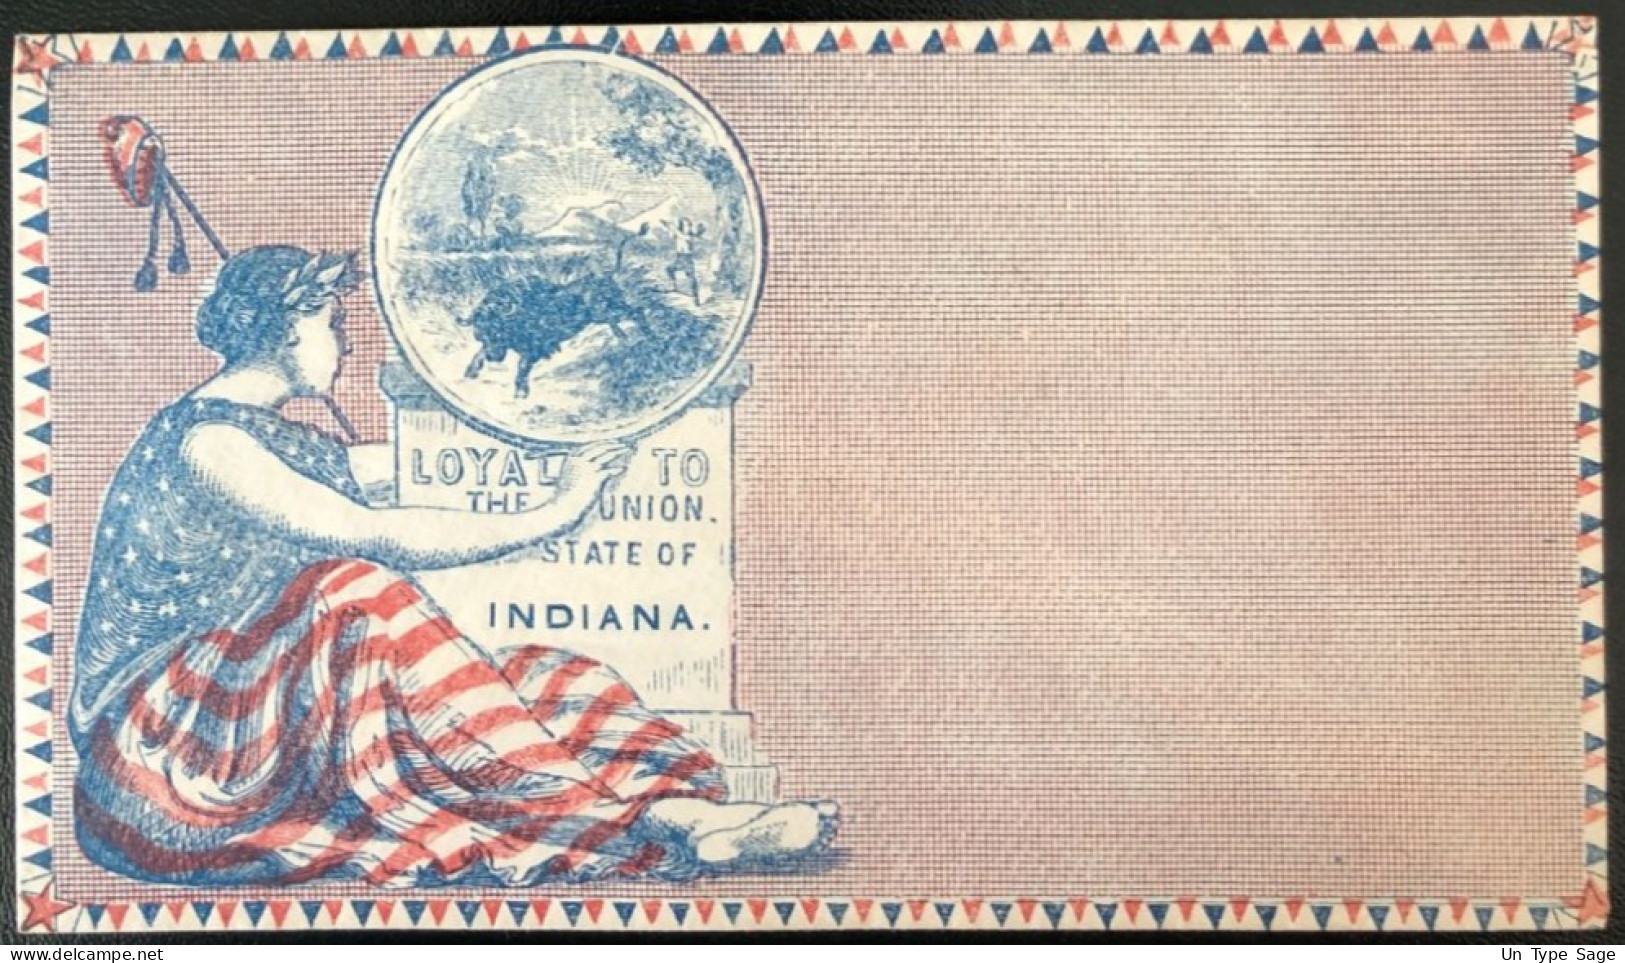 U.S.A, Civil War, Patriotic Cover - "Loyal To The Union. State Of INDIANA" - Unused - (C457) - Poststempel